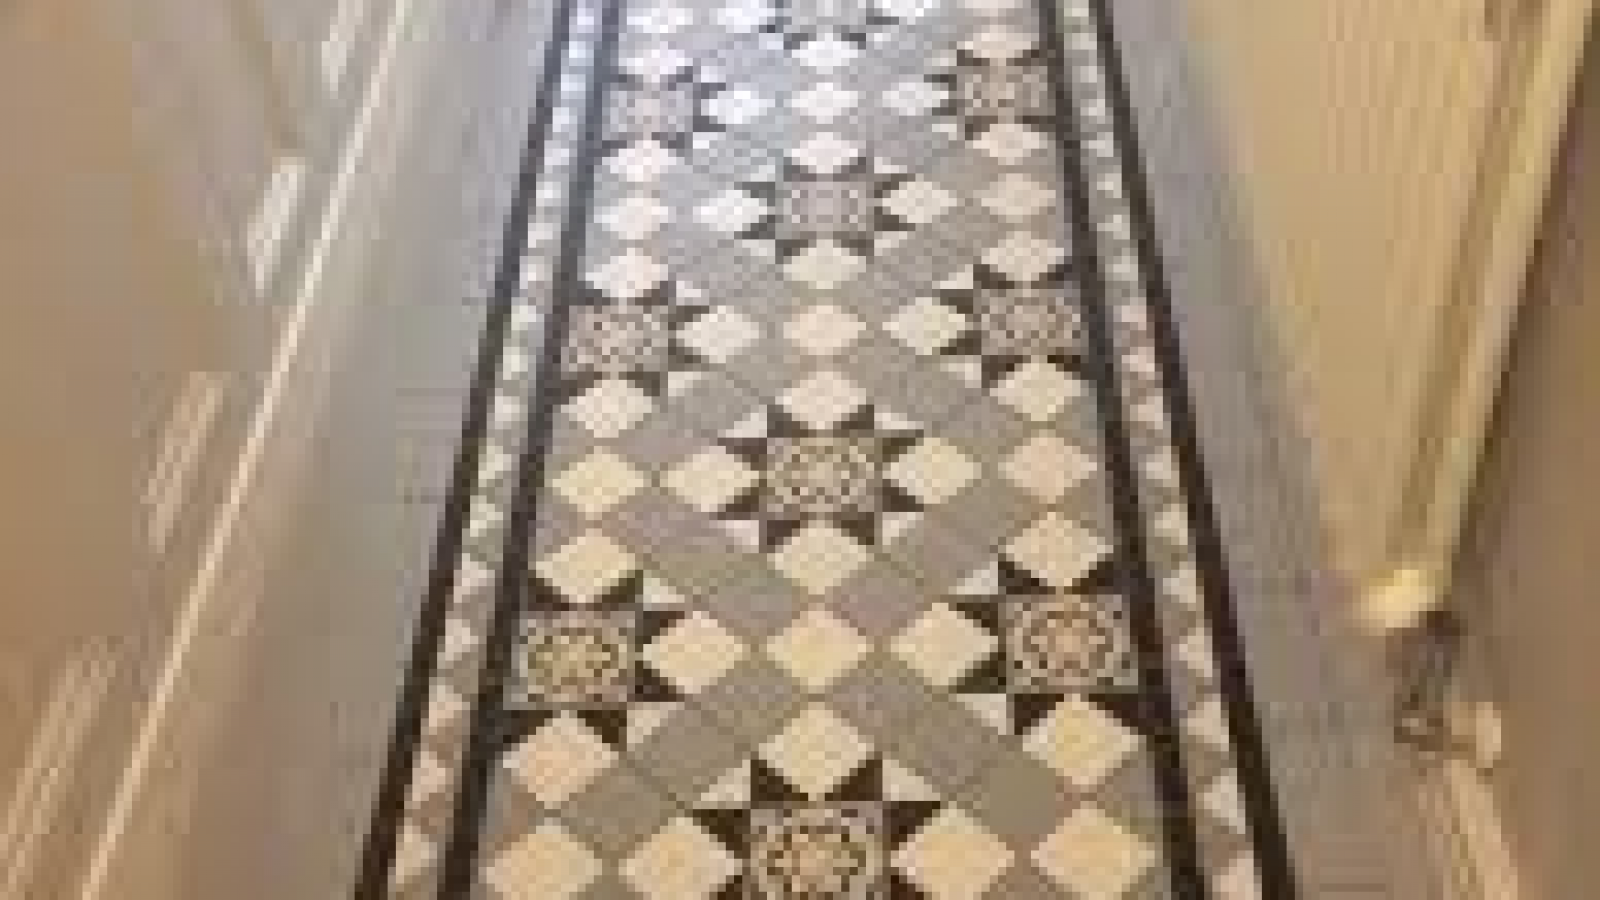 Getting the best out of your Victorian floor tiles.